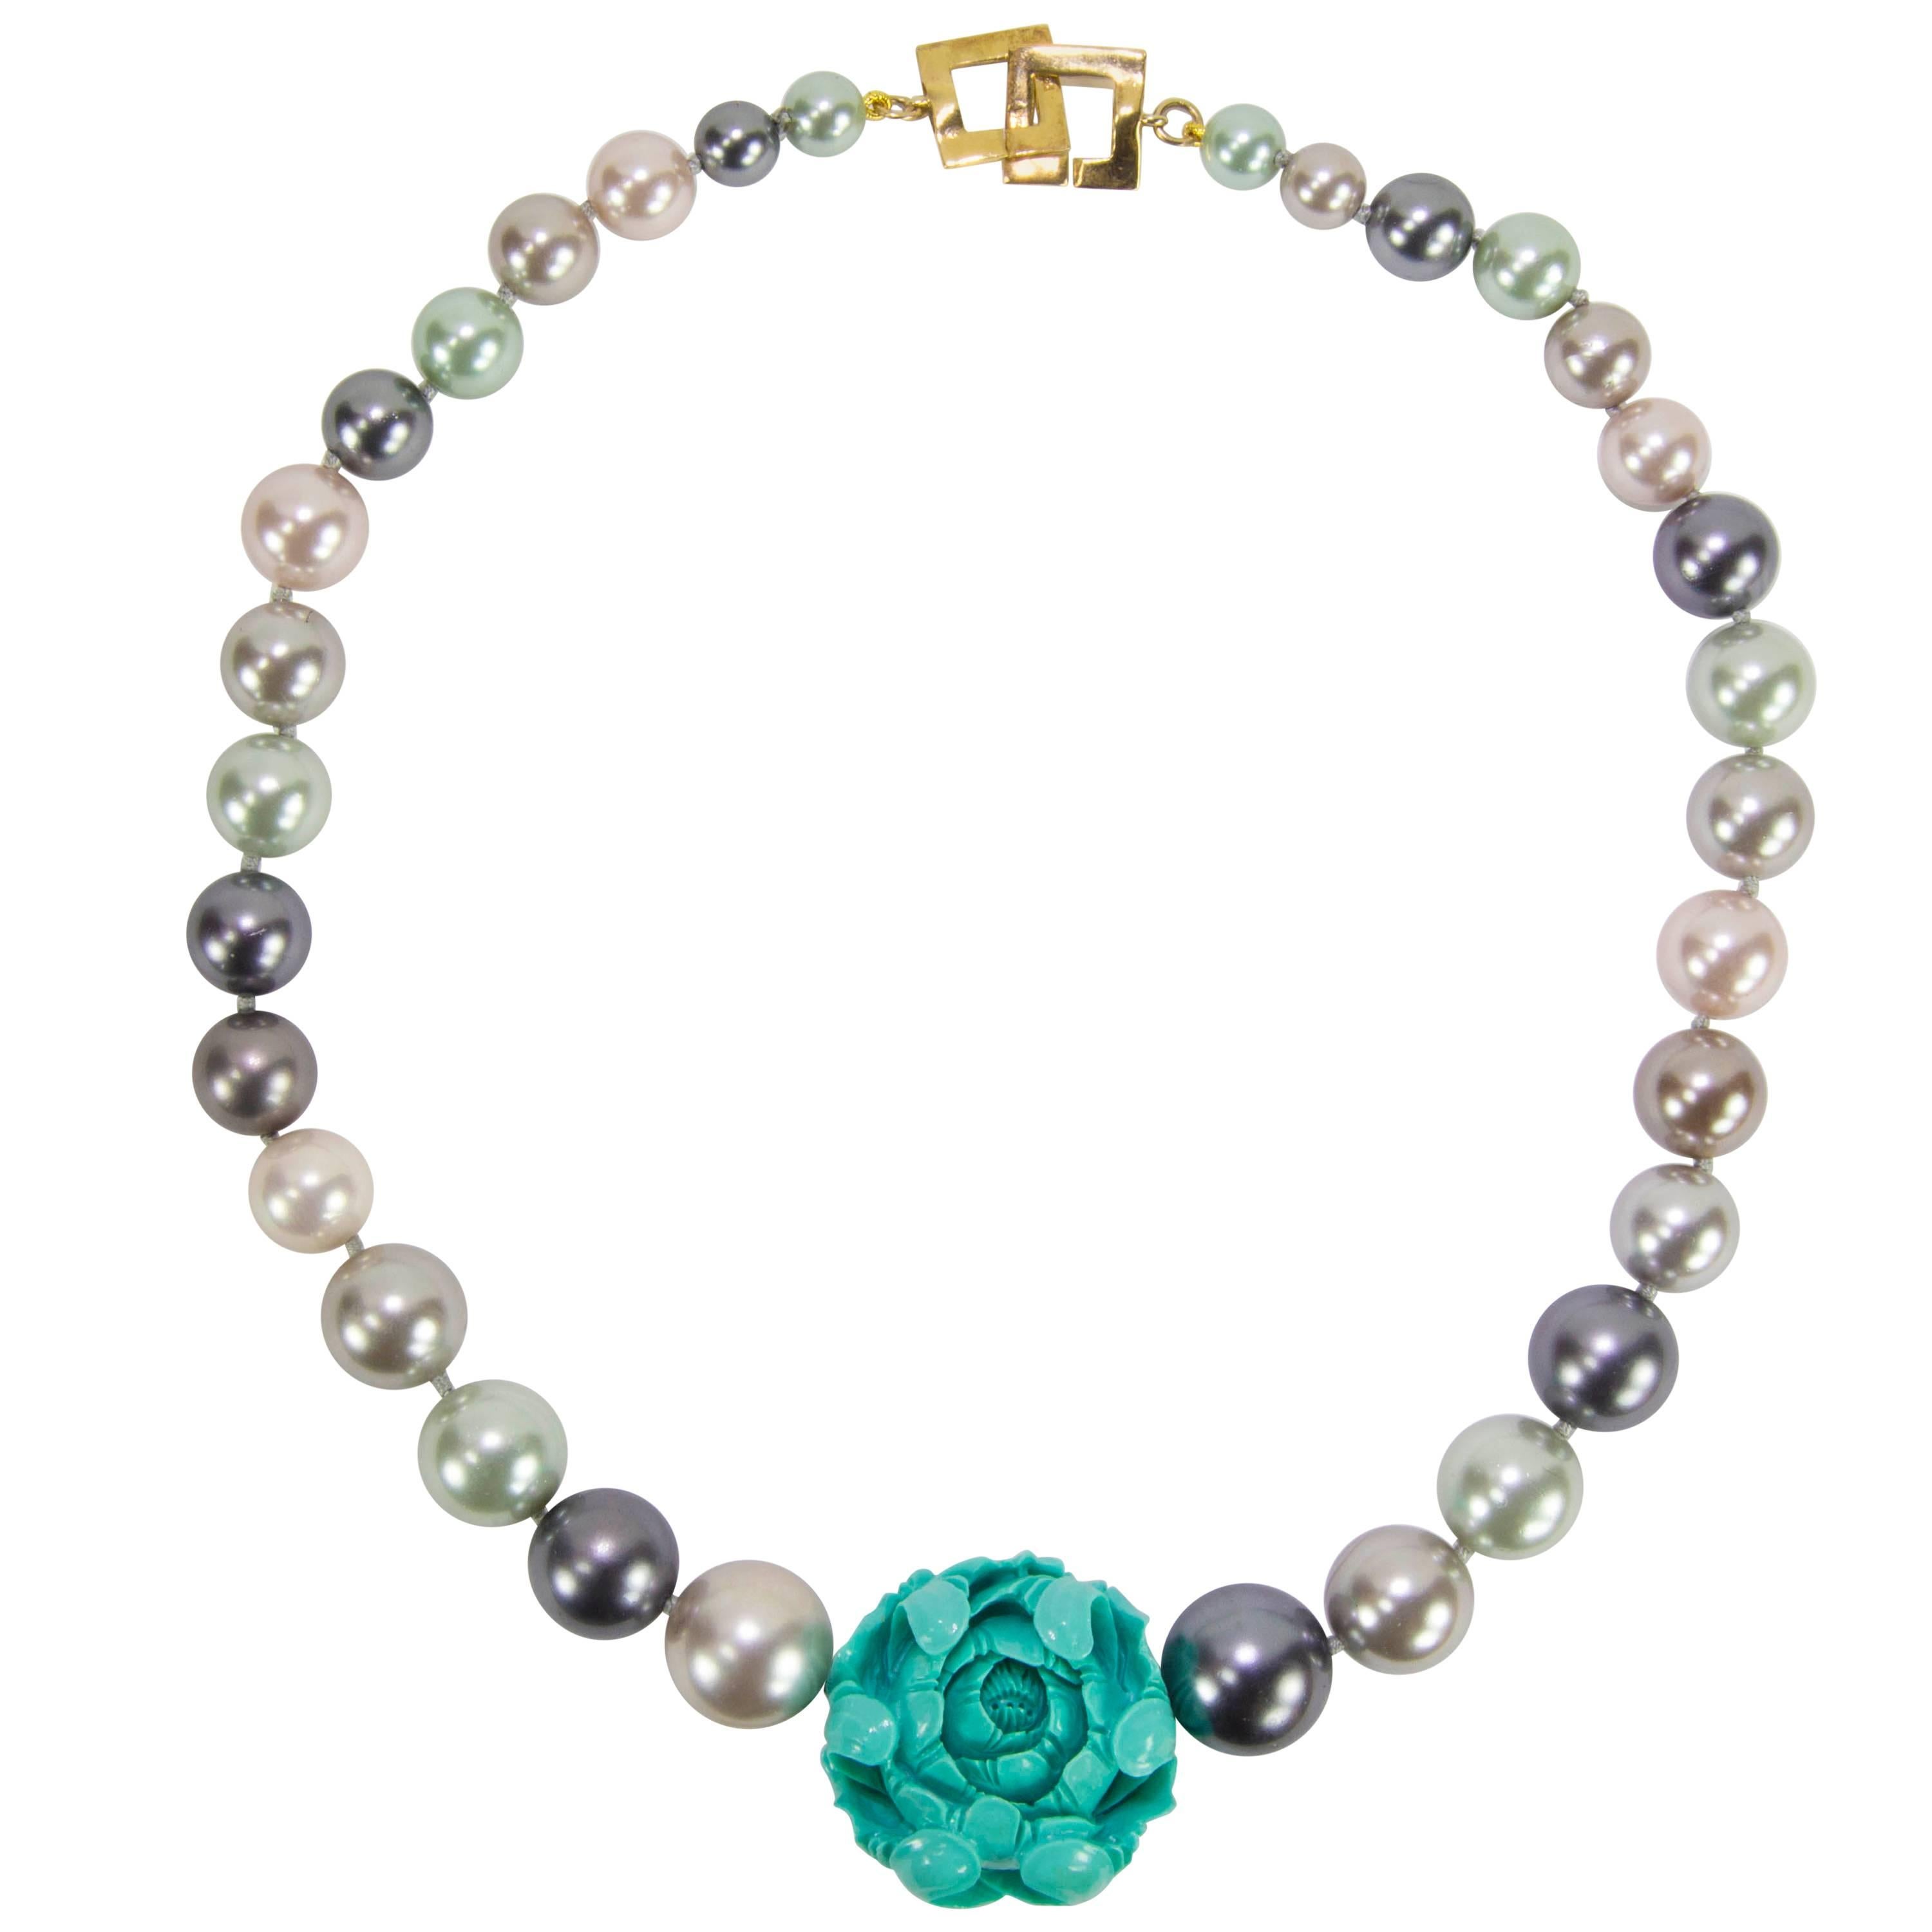 Sriking Faux Pearl and Carved Turquoise Flower Runway Necklace